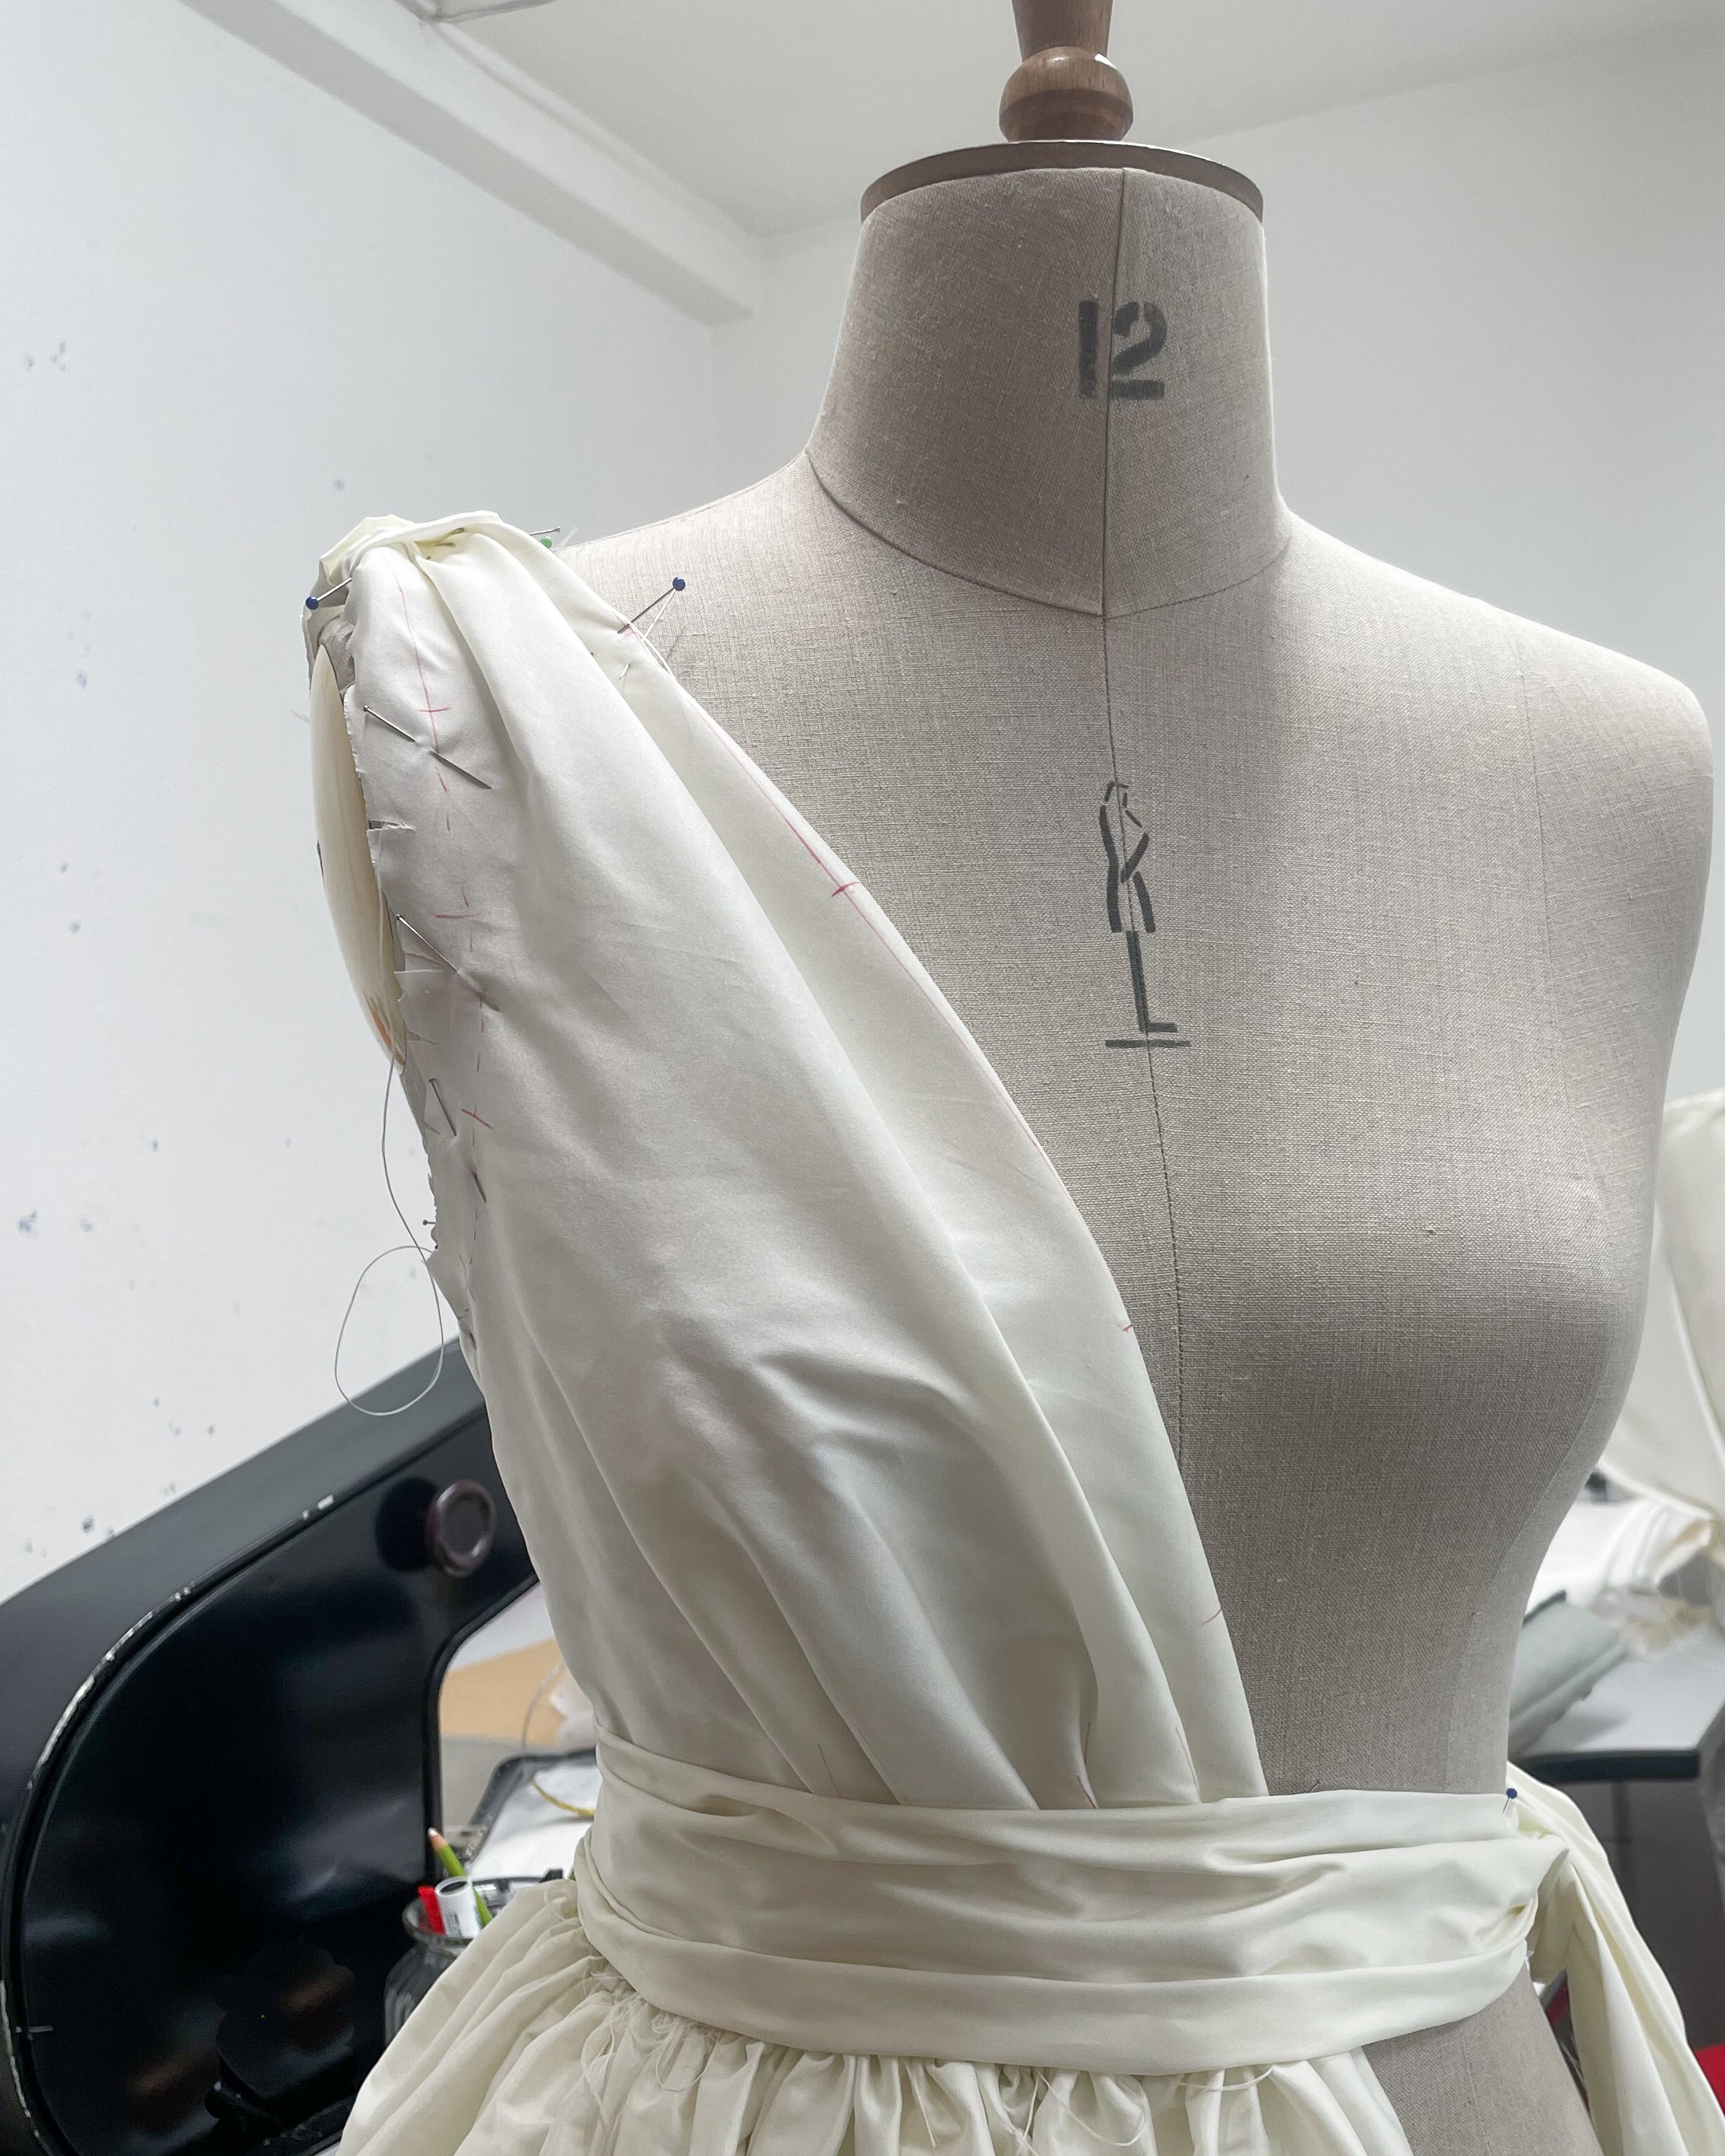 Behind the scenes | Development of the Olive dress by Halfpenny London